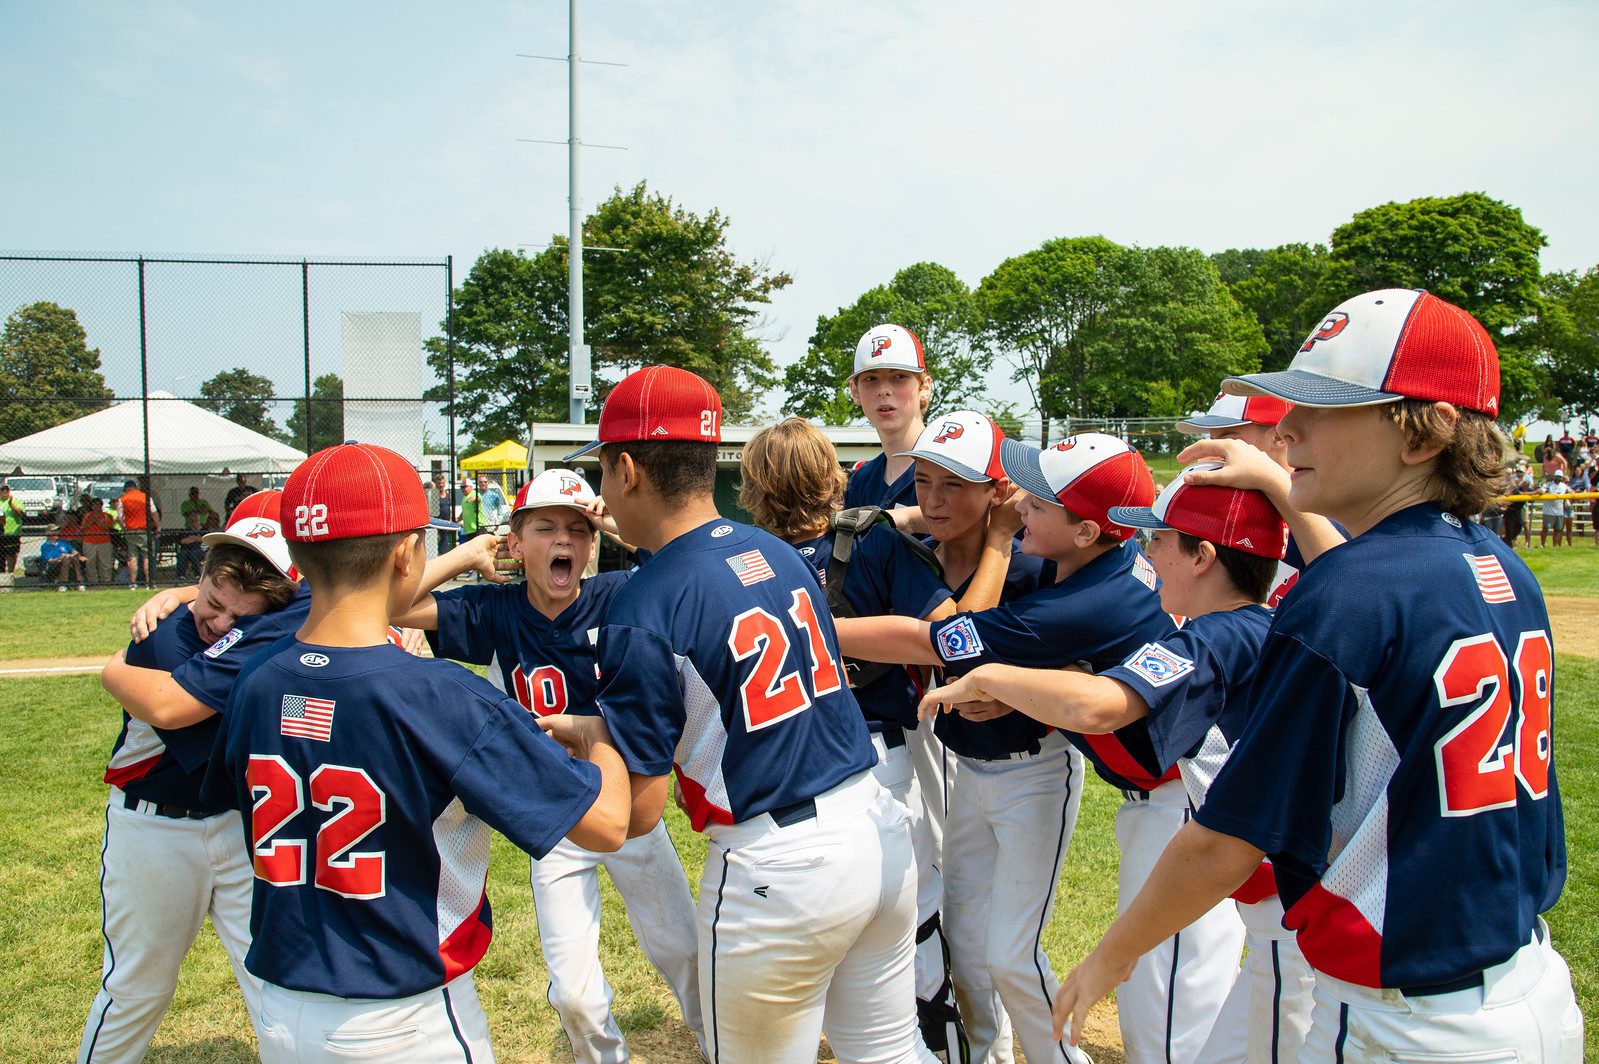 Peabody West wins Massachusetts Little League state title Itemlive